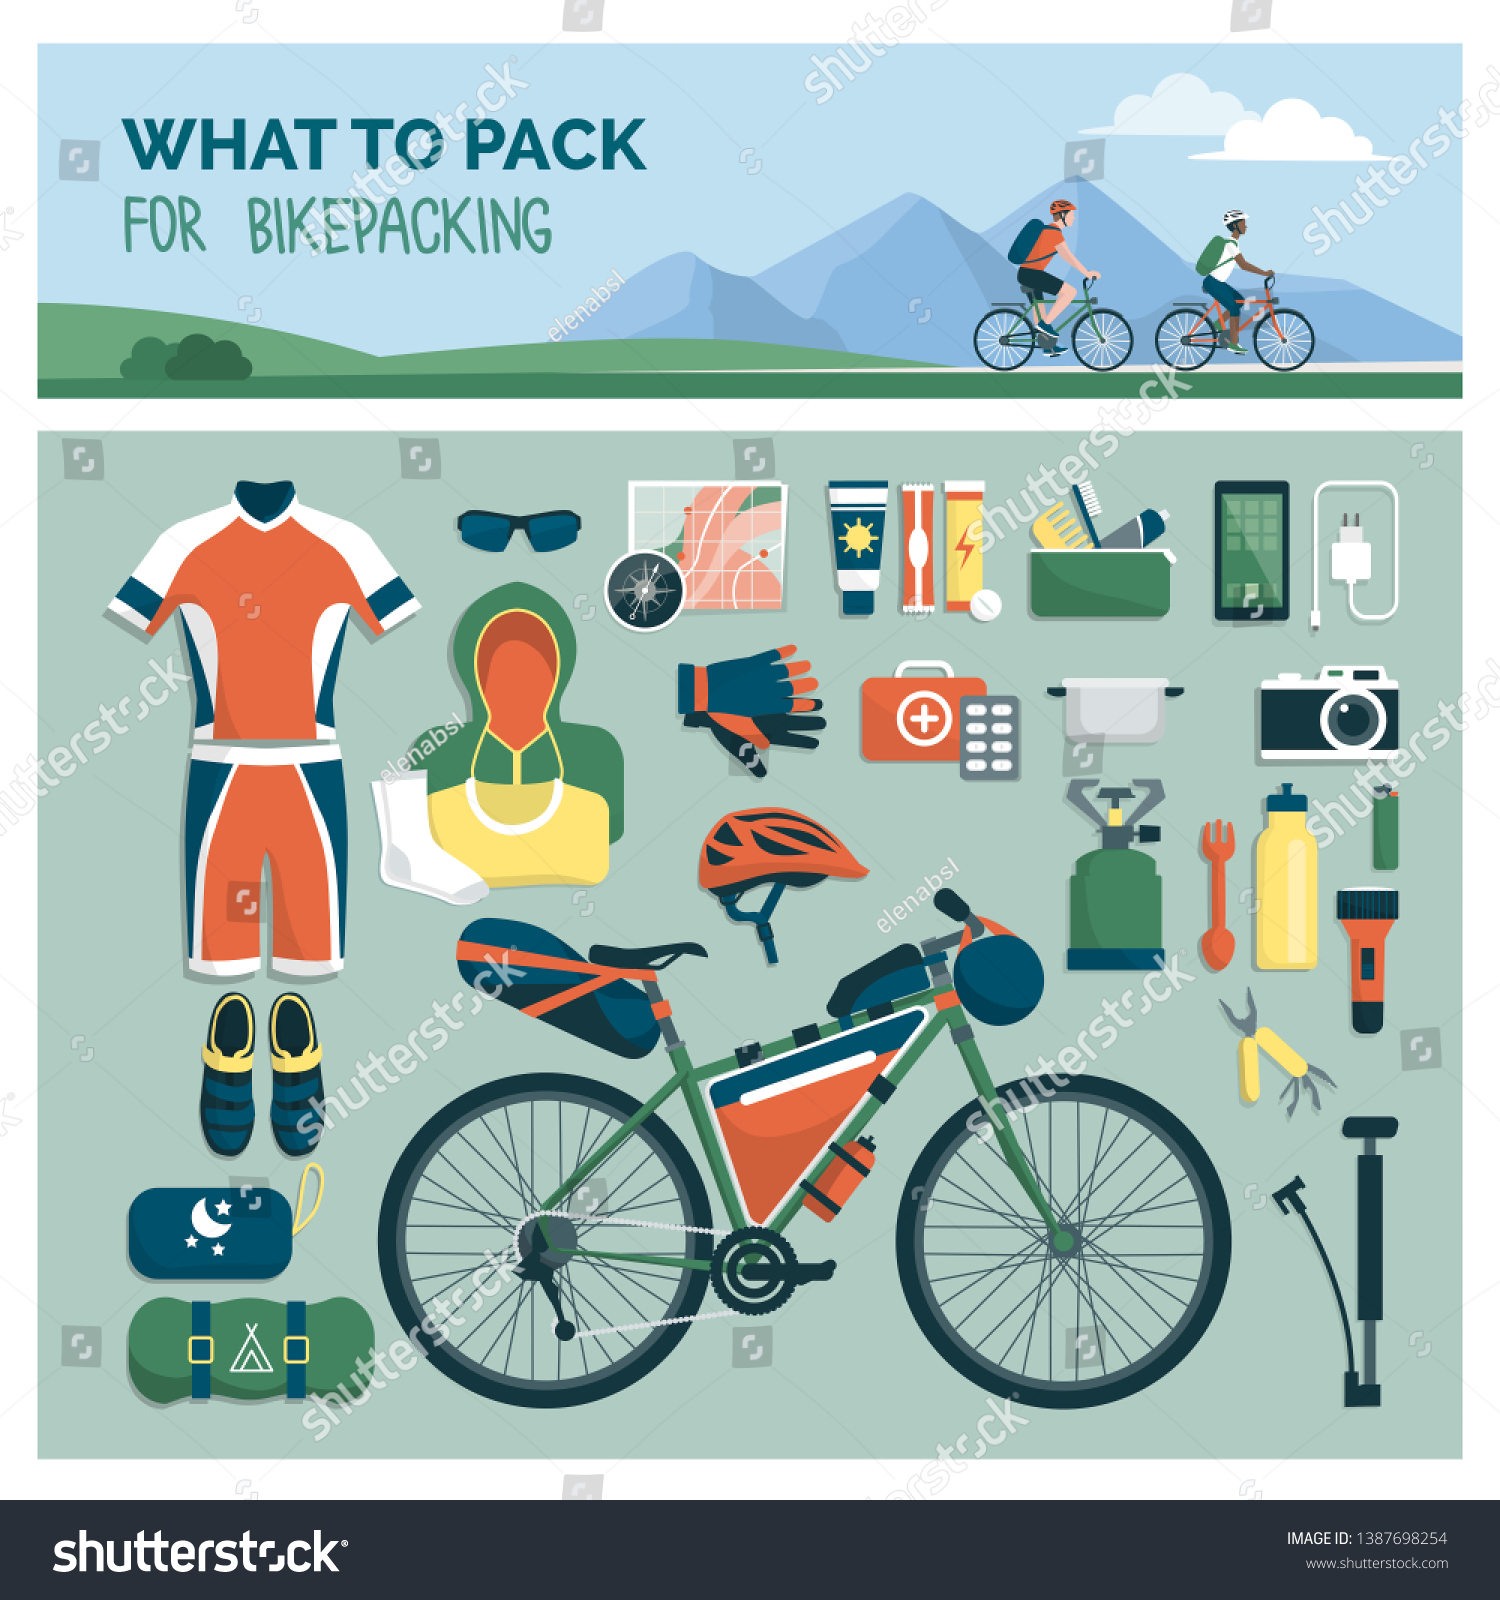 stock-vector-what-to-pack-for-bikepacking-sports-and-outdoor-travel-equipment-gear-for-bikers-flat-lay-objects-1387698254.jpg